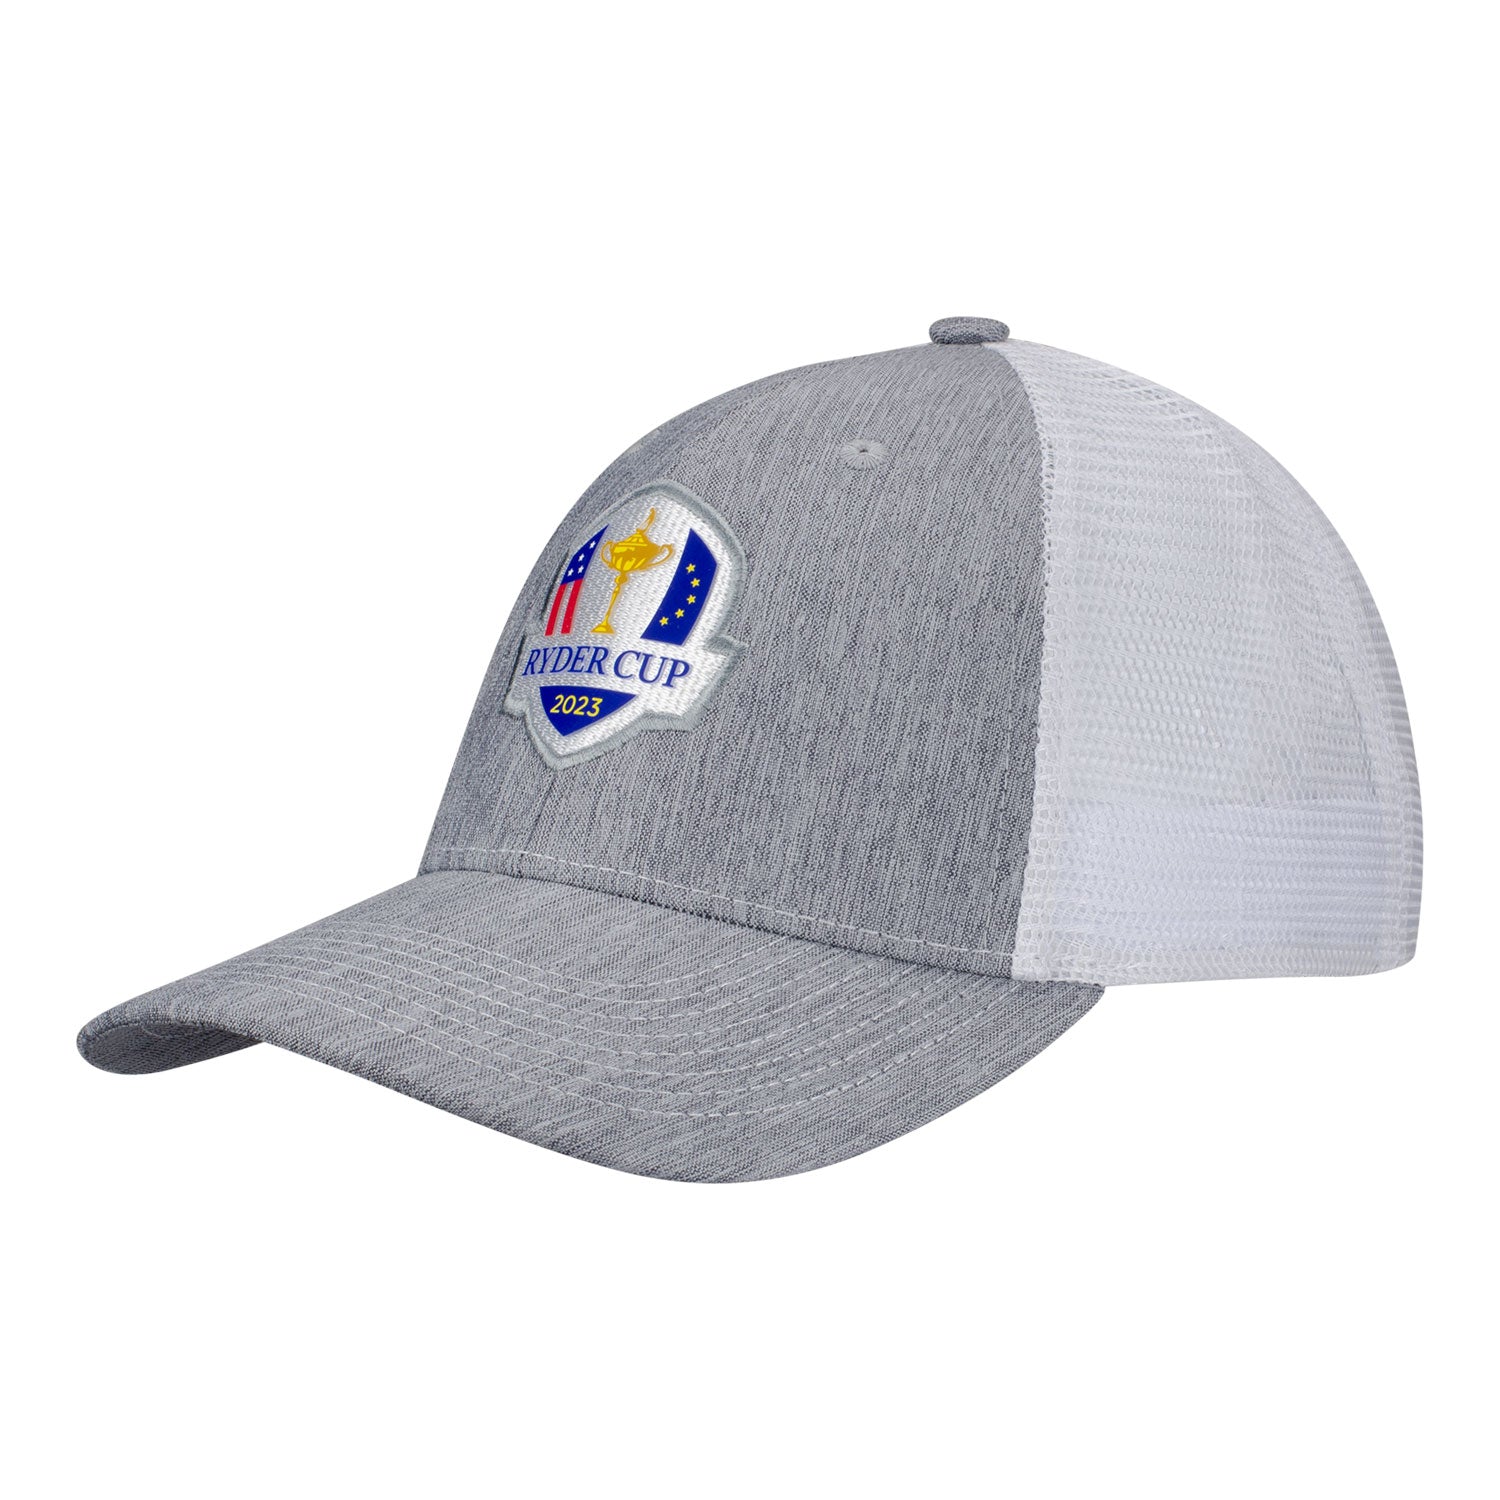 Ahead 2023 Ryder Cup Hat in Grey & White- Front View